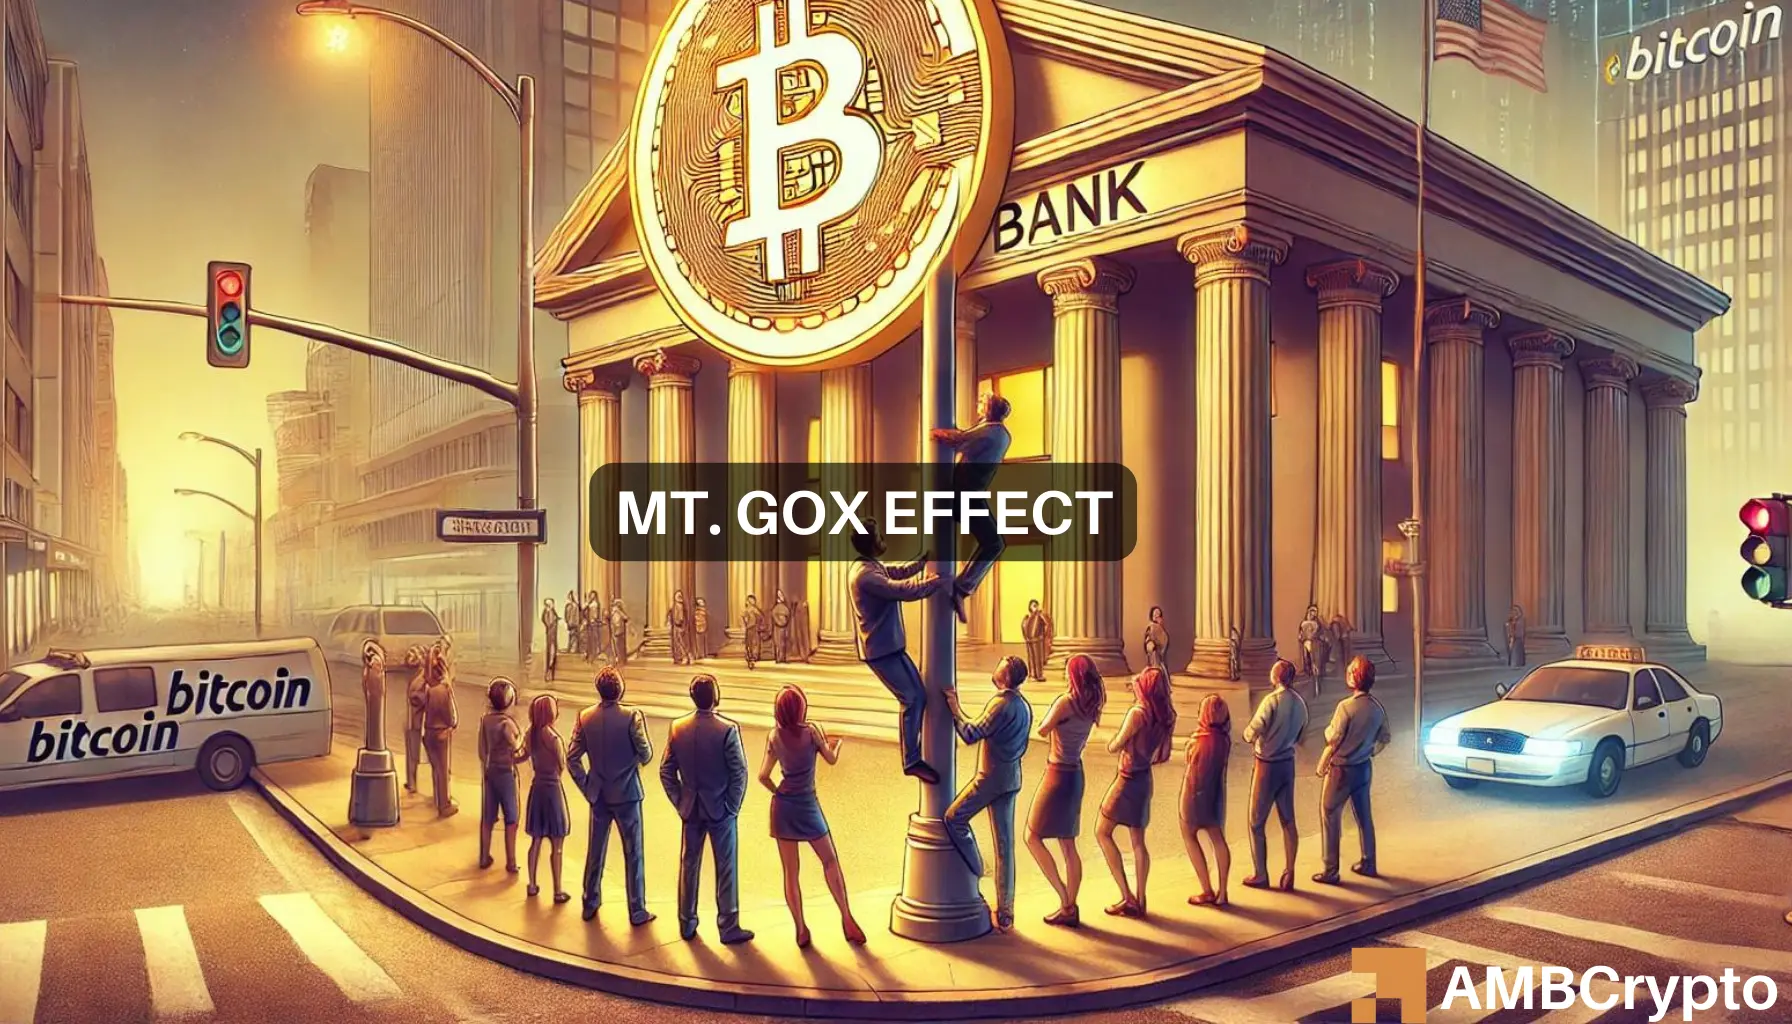 Will Mt. Gox creditors sell their Bitcoin? Reddit poll has the answer!